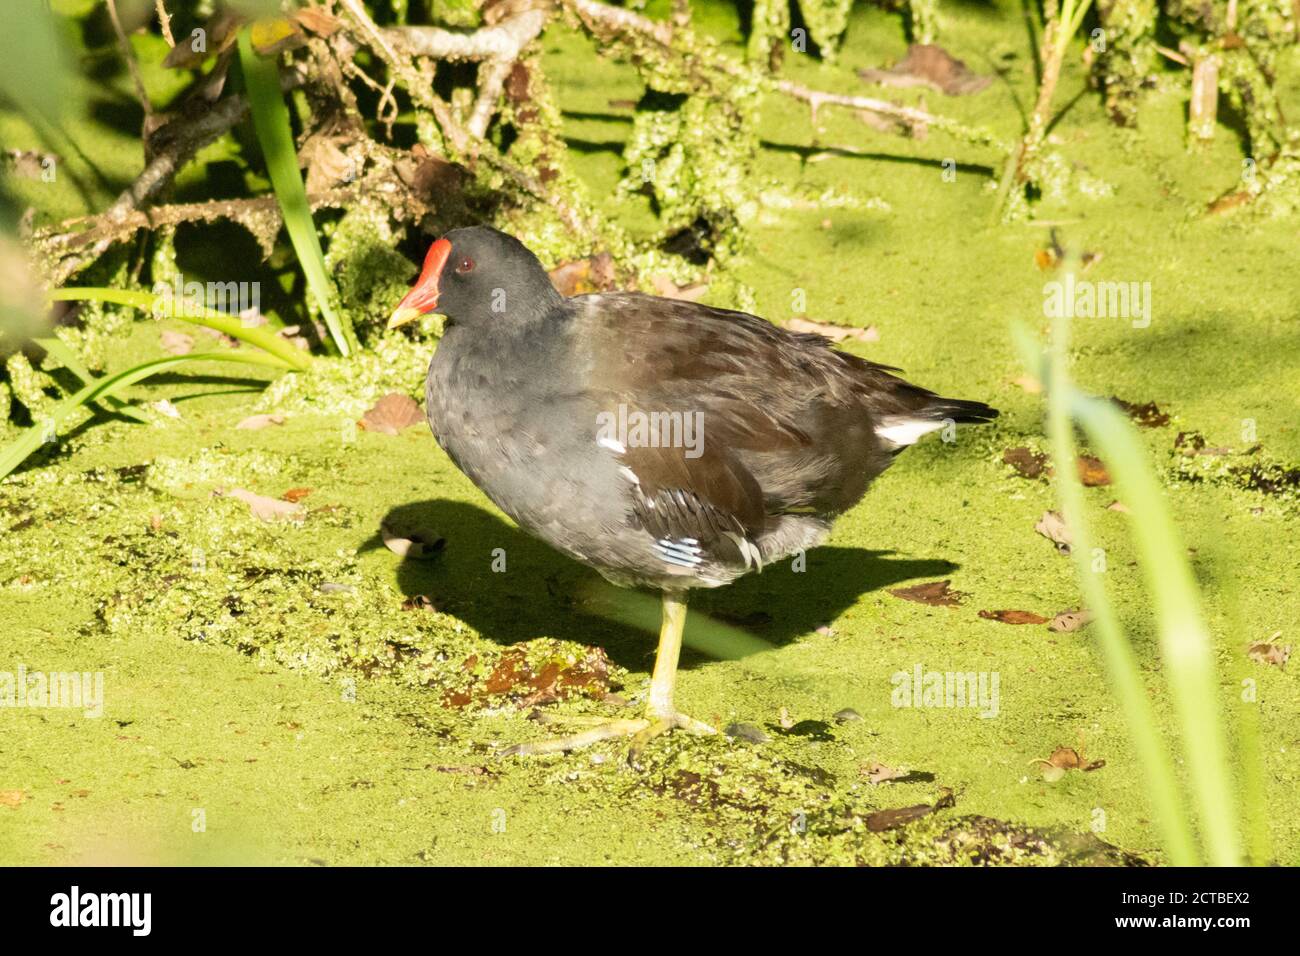 Fully grown adult or mature moorhen standing on a piece of wood in a canal covered in algae. Water hen, rallidae, gallinula chloropus Stock Photo